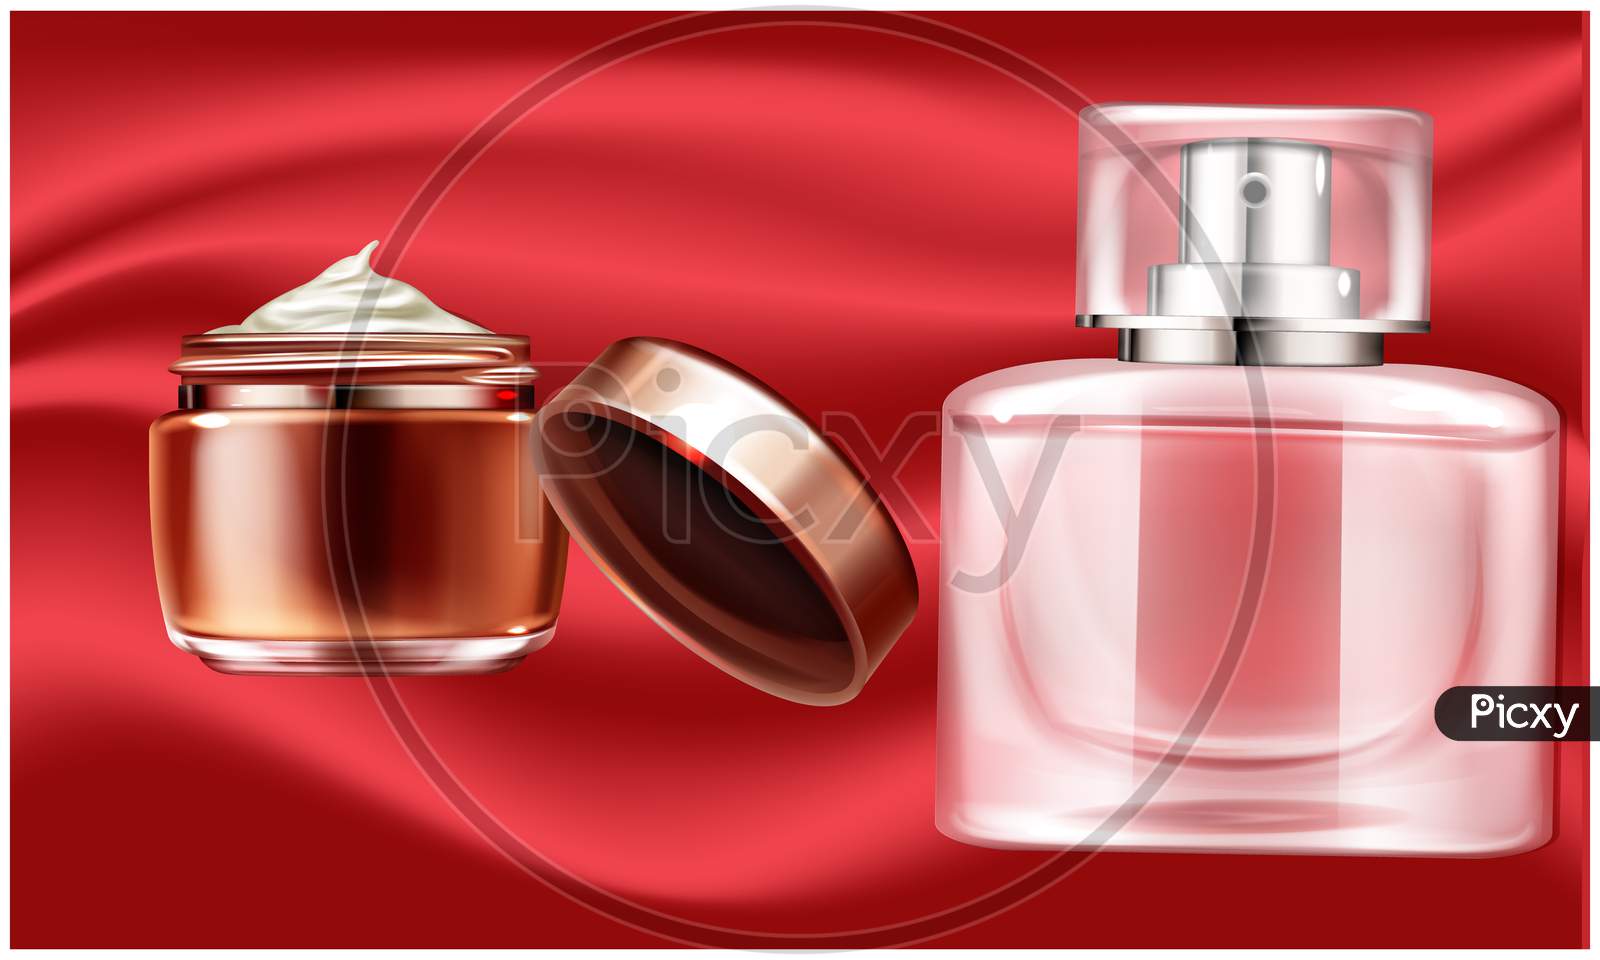 Mock Up Illustration Of Female Perfume And Body Lotion Set On Abstract Background